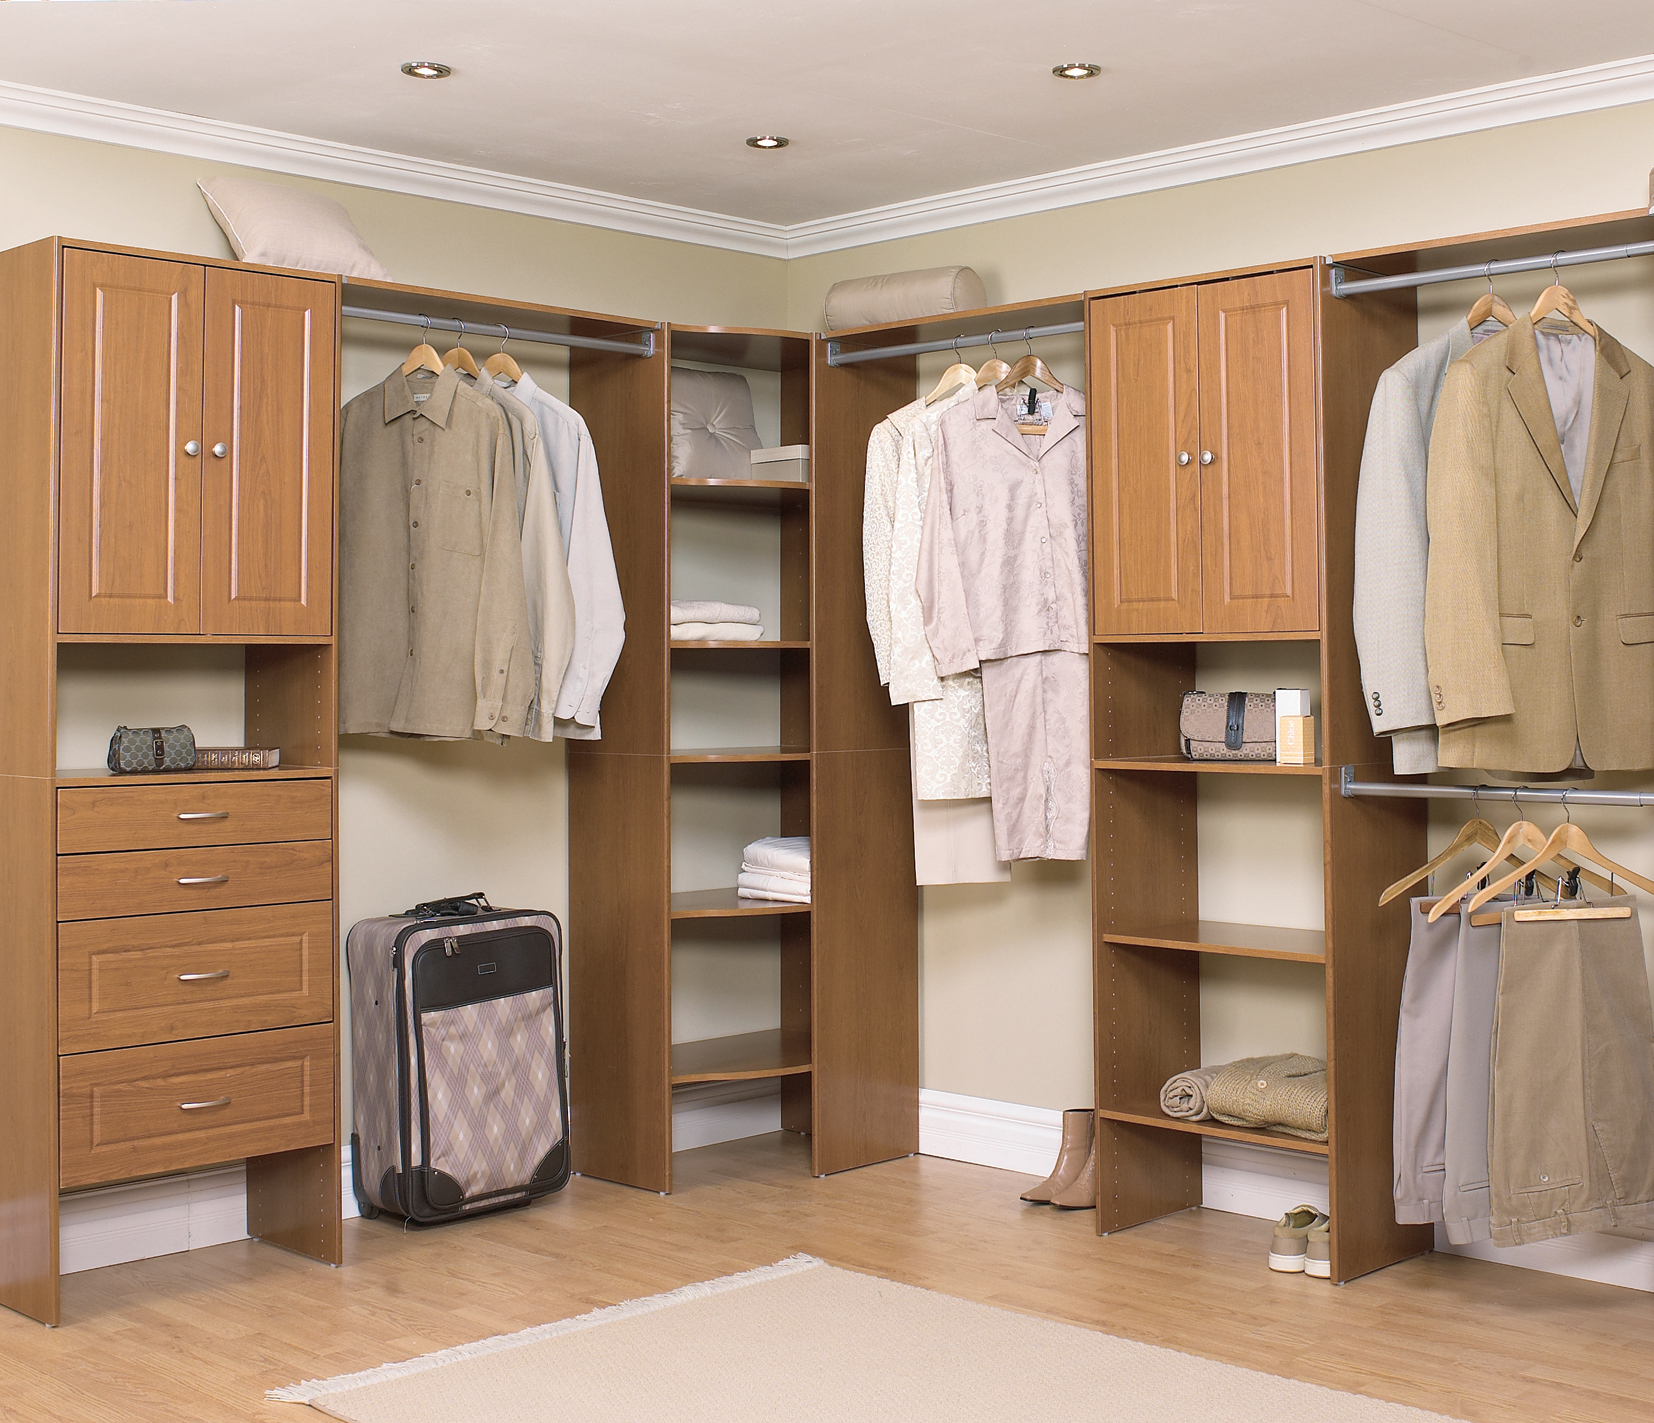 large walk in closet house plans photo - 4